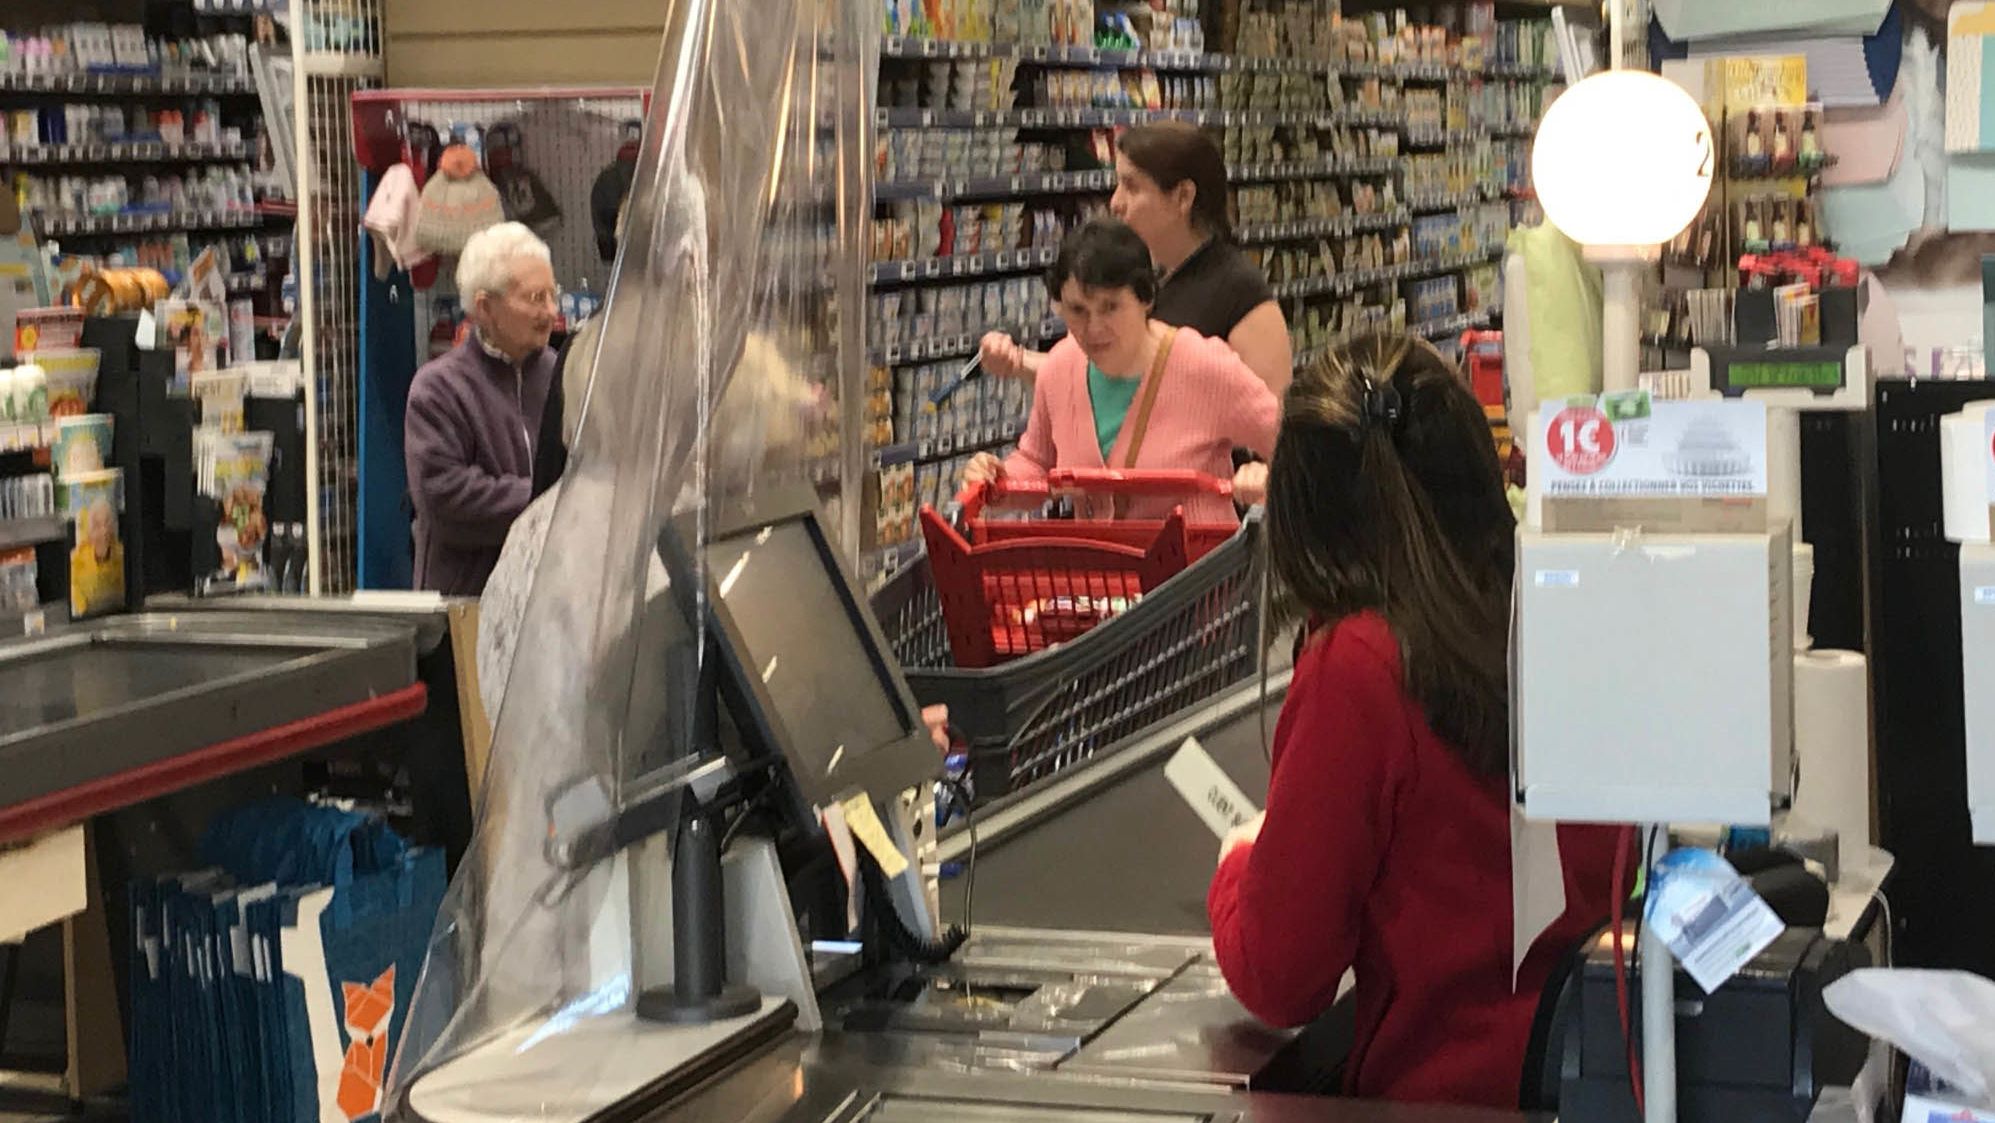 Cashiers separated from customers by plastic.